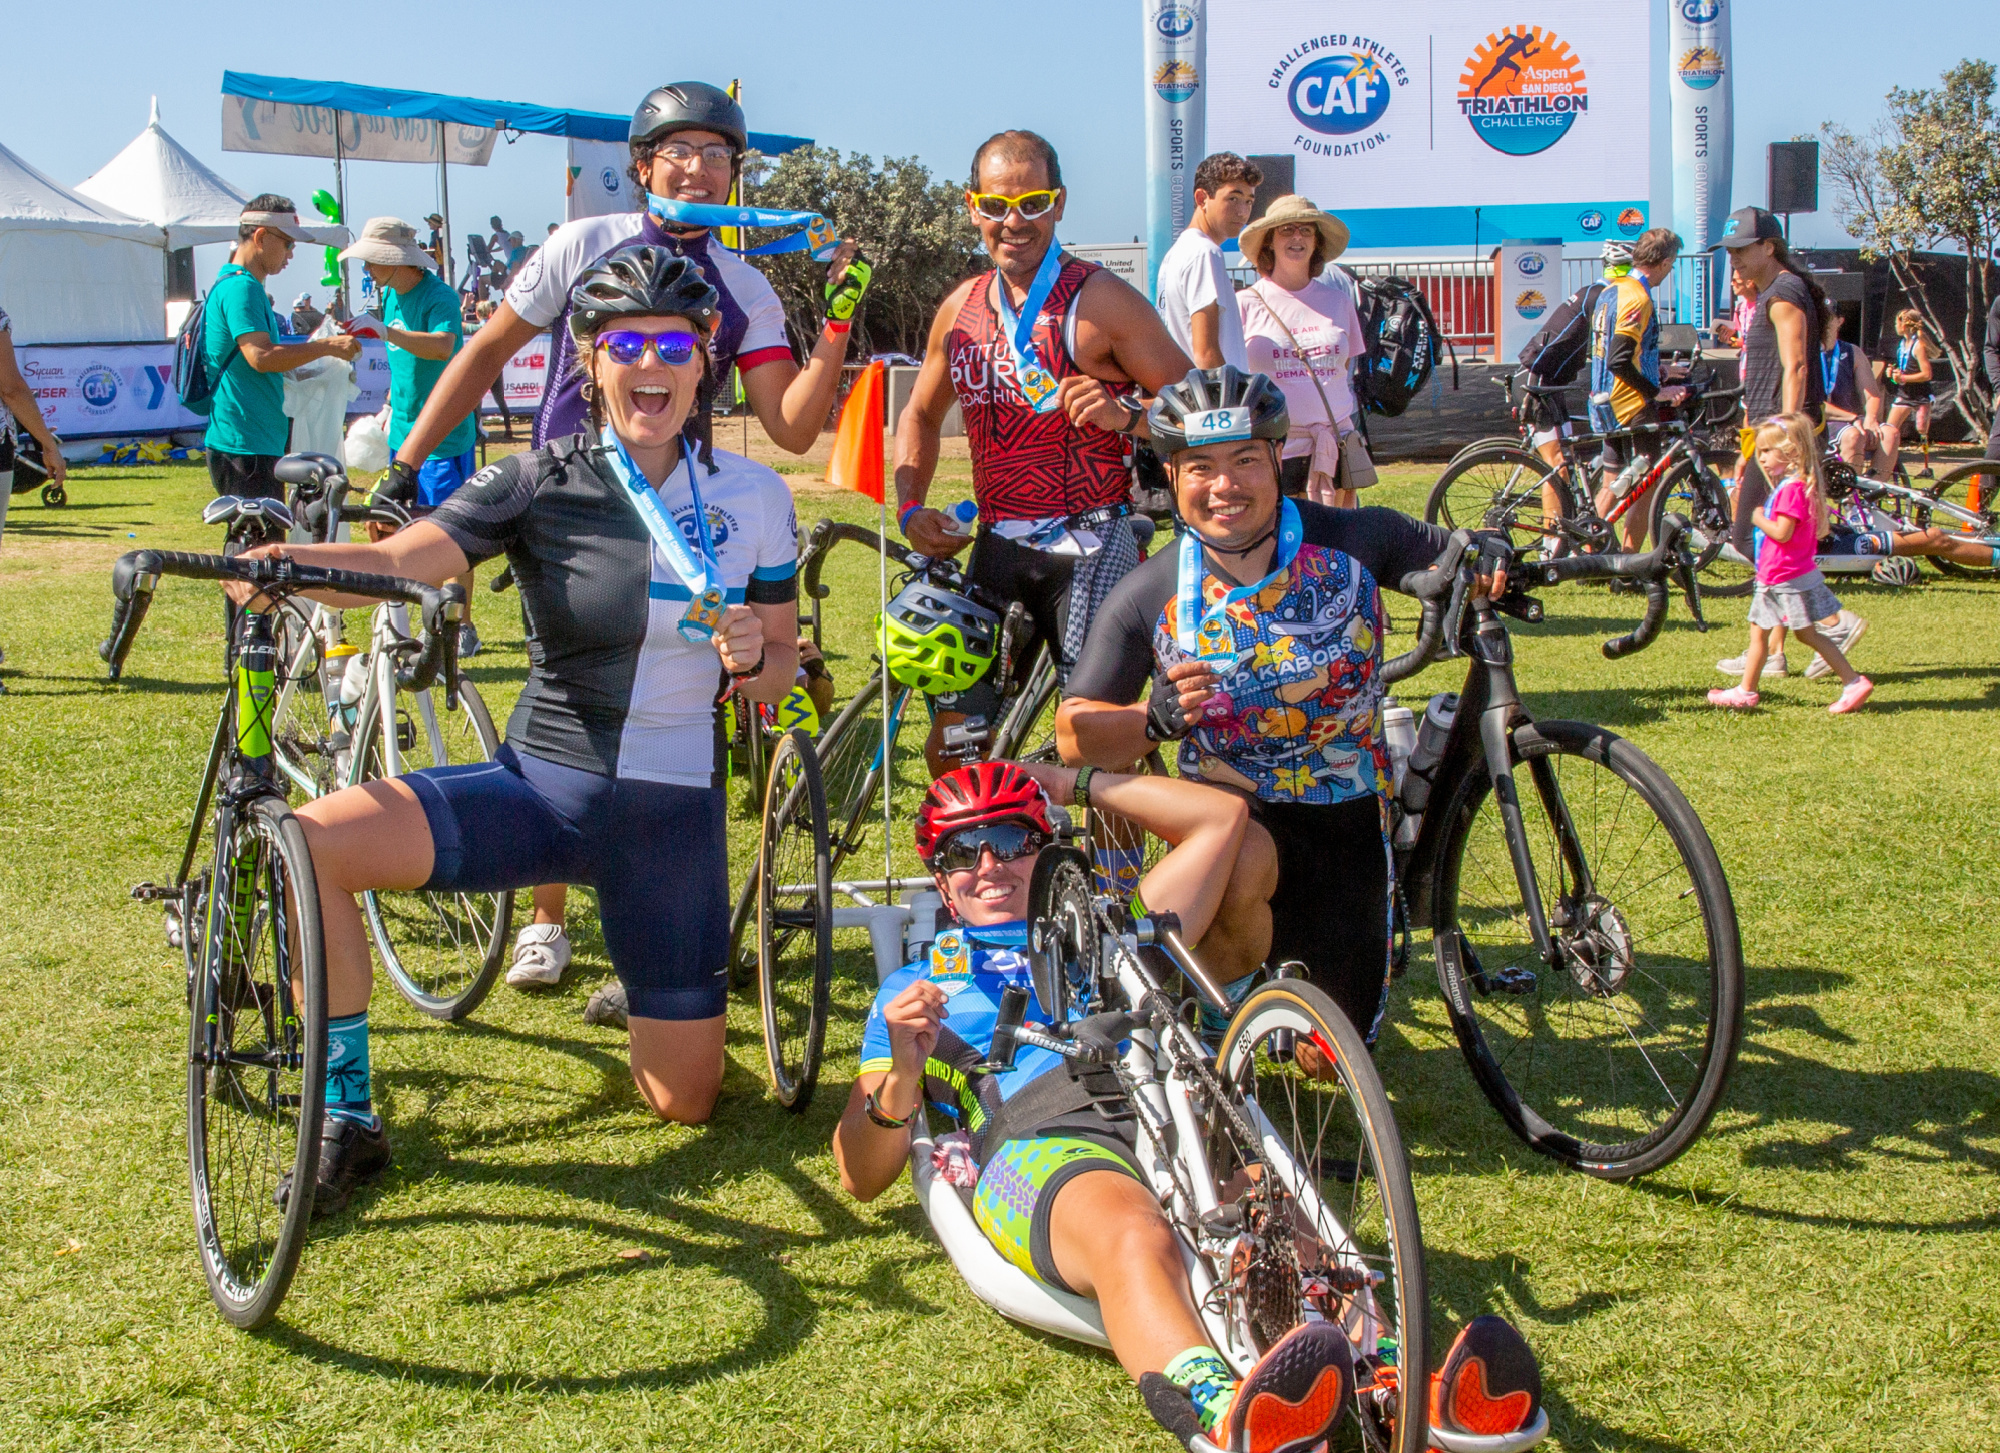 The San Diego Triathlon Challenge returns to celebrate athletes with physical challenges, reunite the community and raise millions of dollars for CAF's mission.